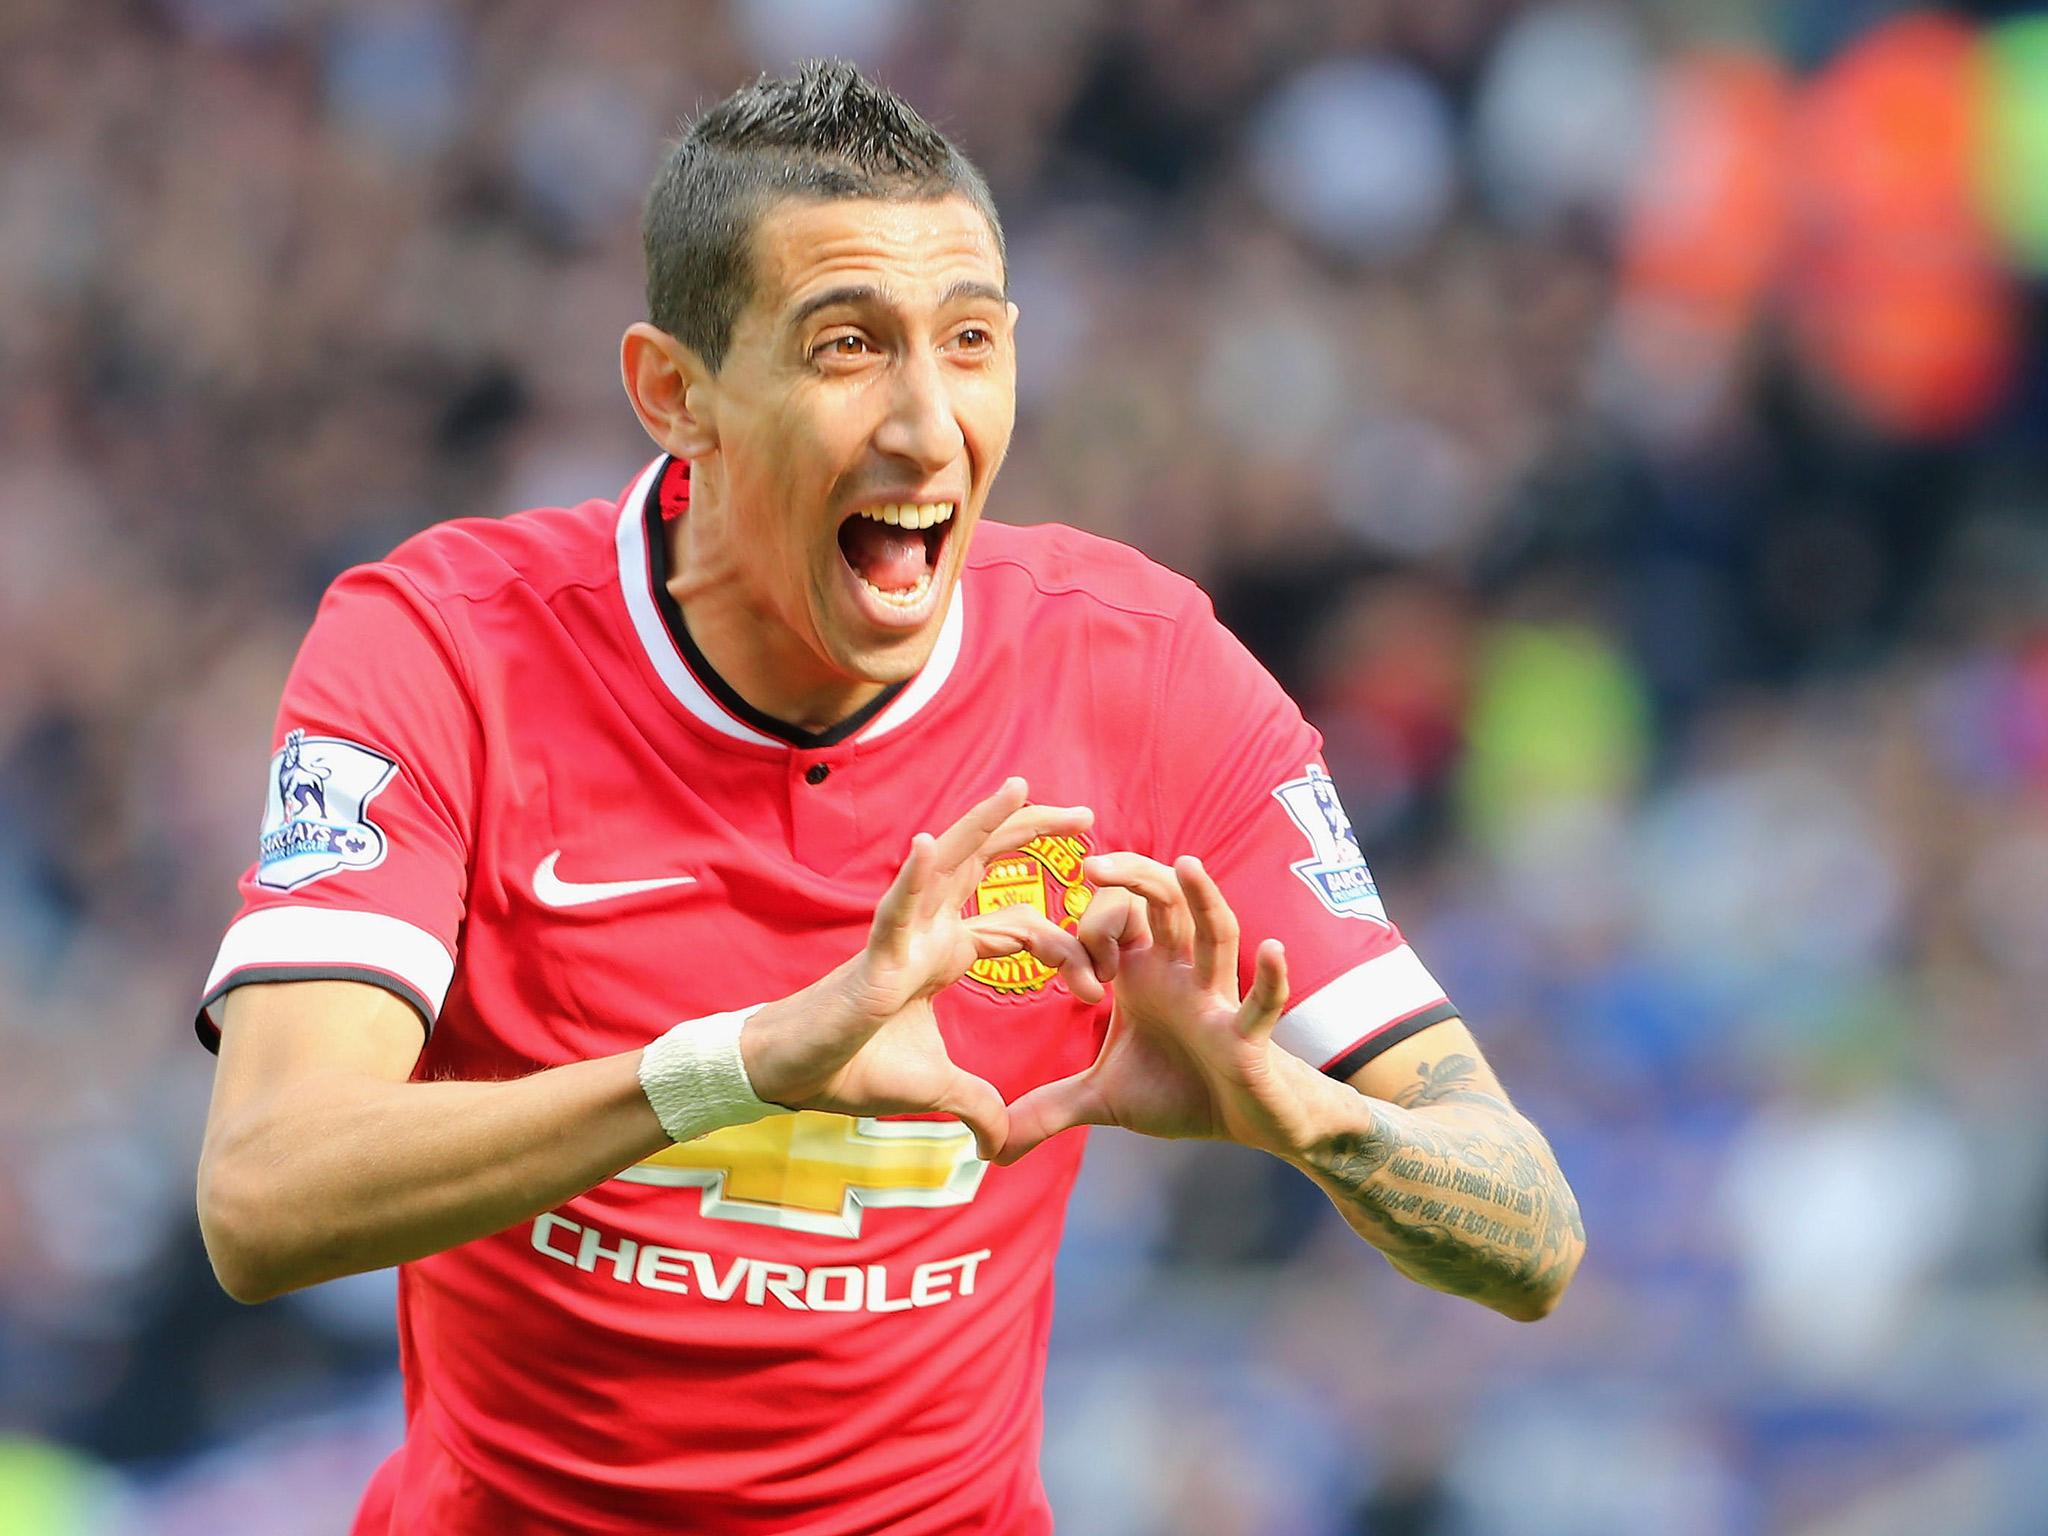 Di Maria showed only glimpses of his class at United